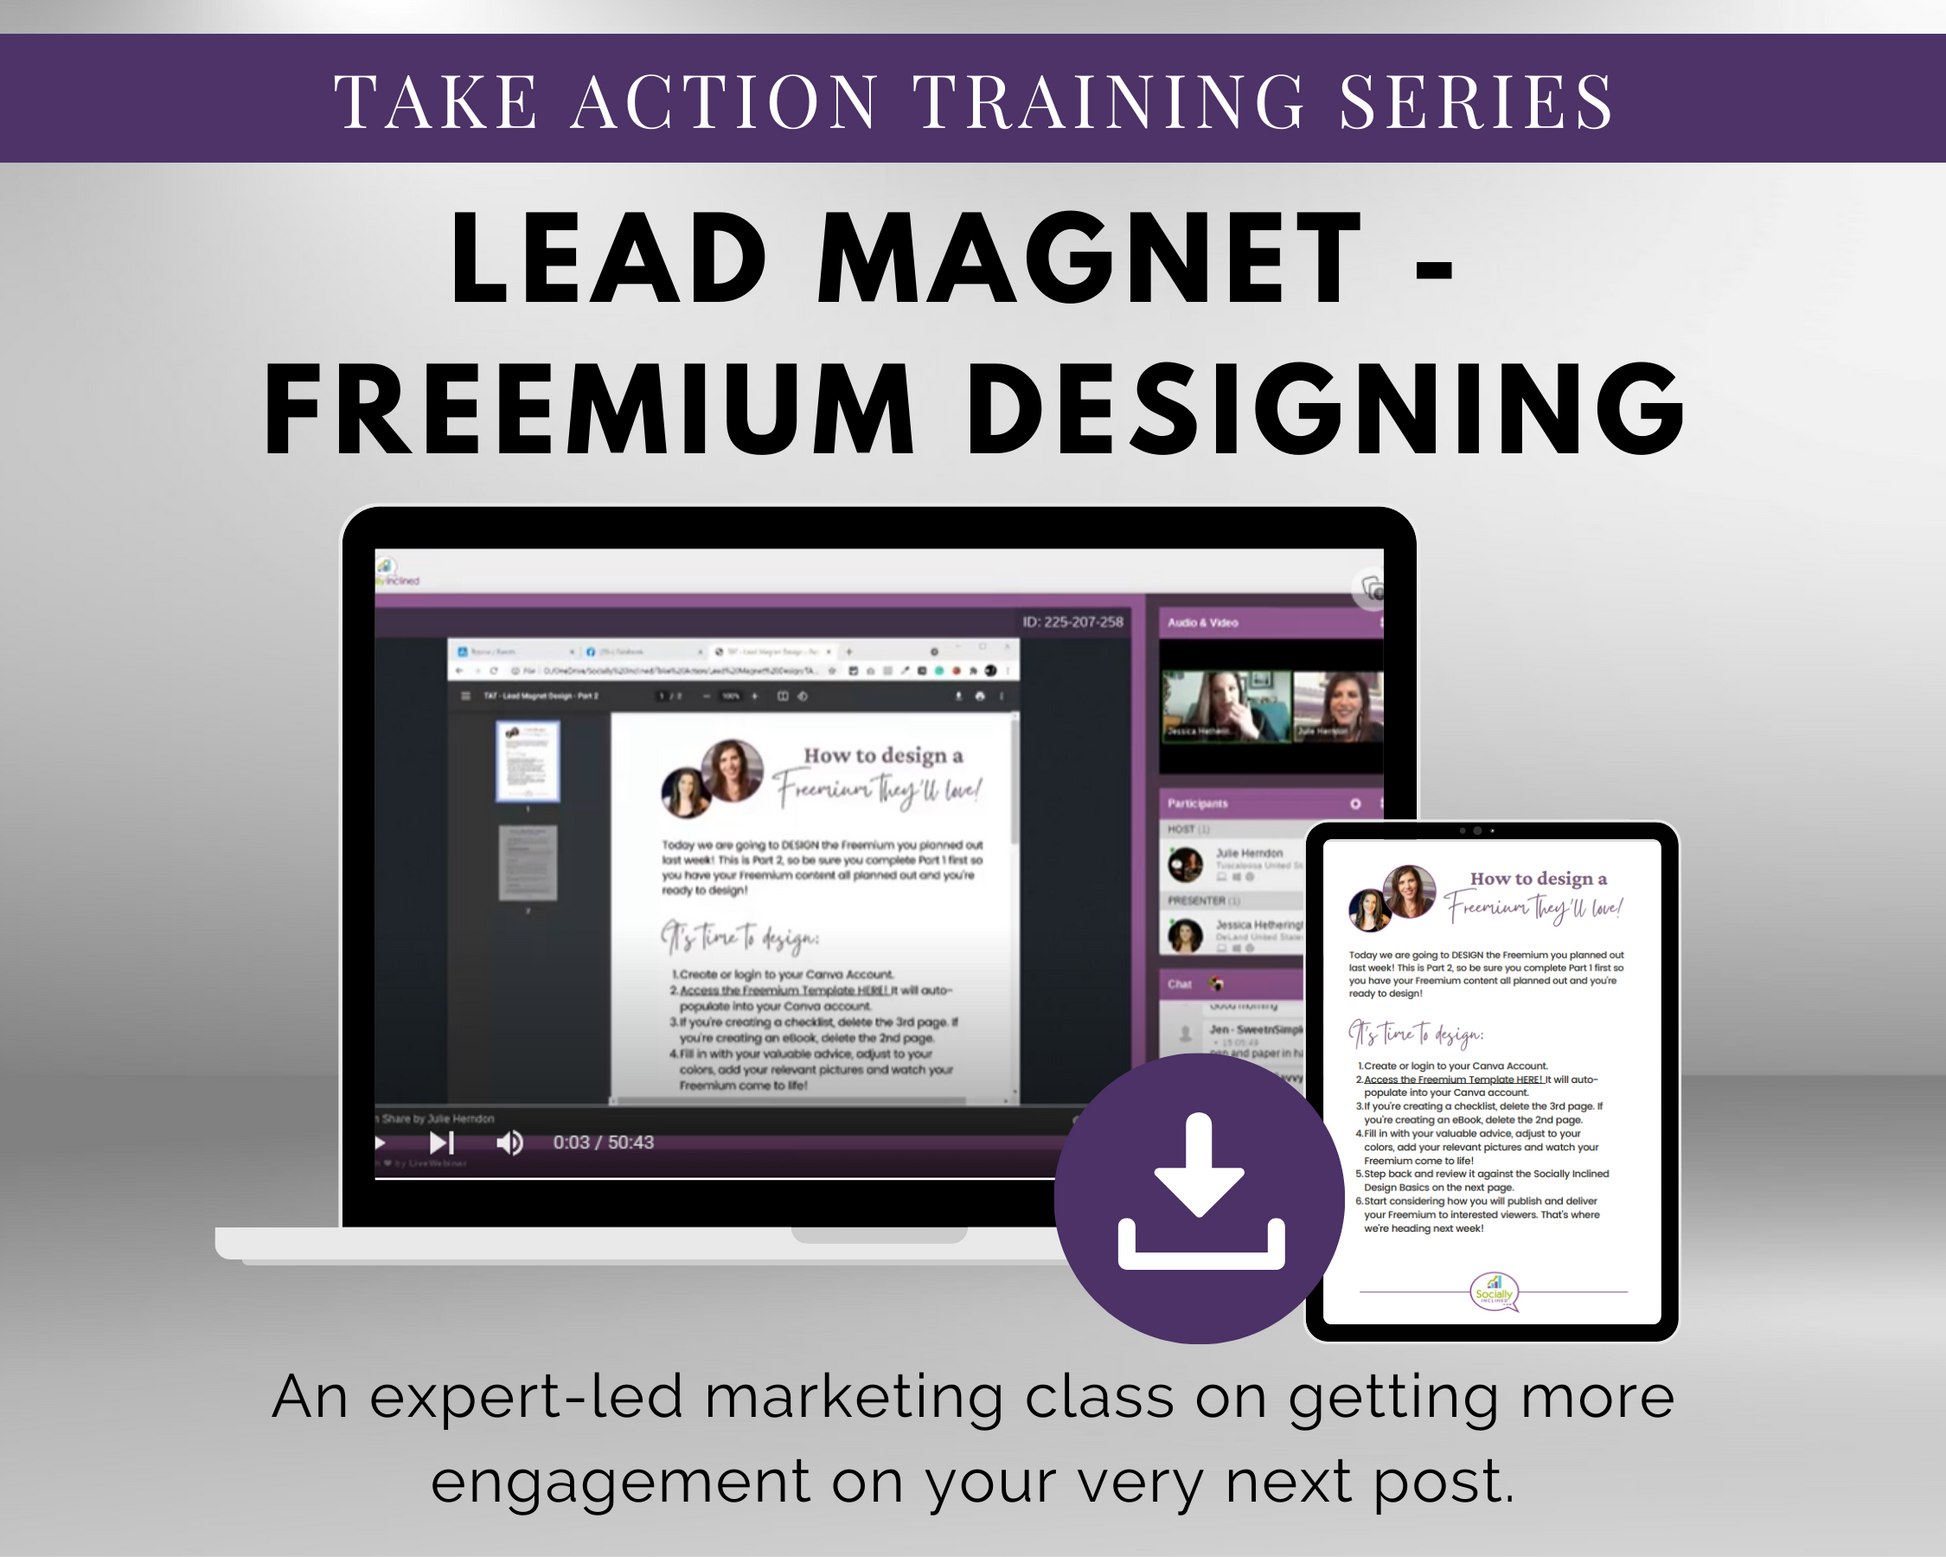 Lead magnet - TAT - Freemium Designing Masterclass. This lead magnet from Get Socially Inclined boasts a fantastic premium design that will leave your audience impressed and eager to engage with what you have to offer. Discover how this visually stunning lead magnet can effectively drive conversions.